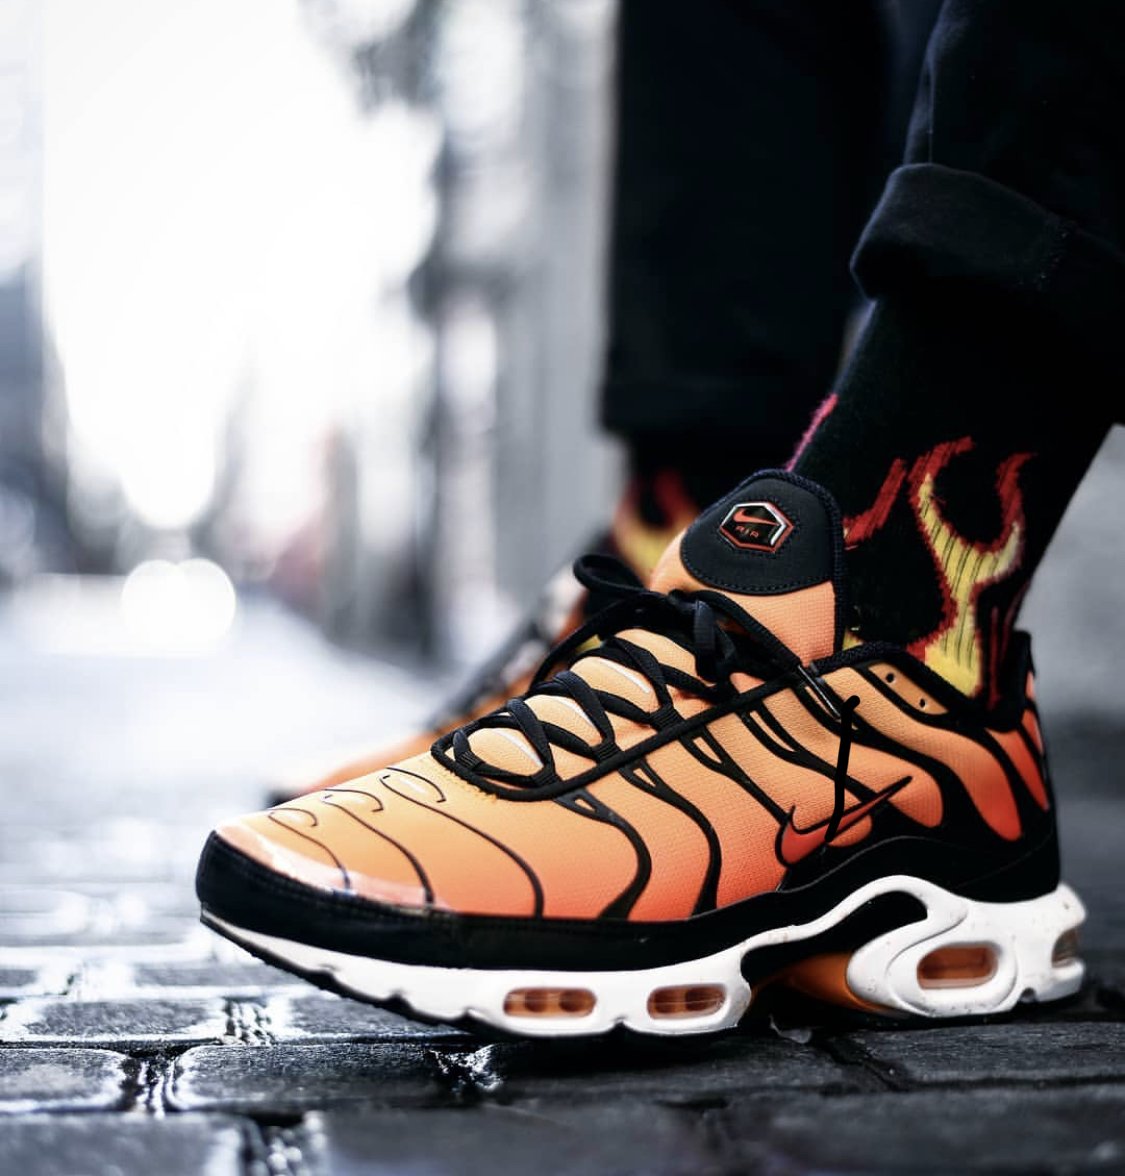 SOLELINKS on Twitter: "Ad: 25% OFF Nike Air Max Plus OG at $120 + shipping, use SAVE25 https://t.co/fovgPGDqGH https://t.co/YxbT02X0xo" / Twitter